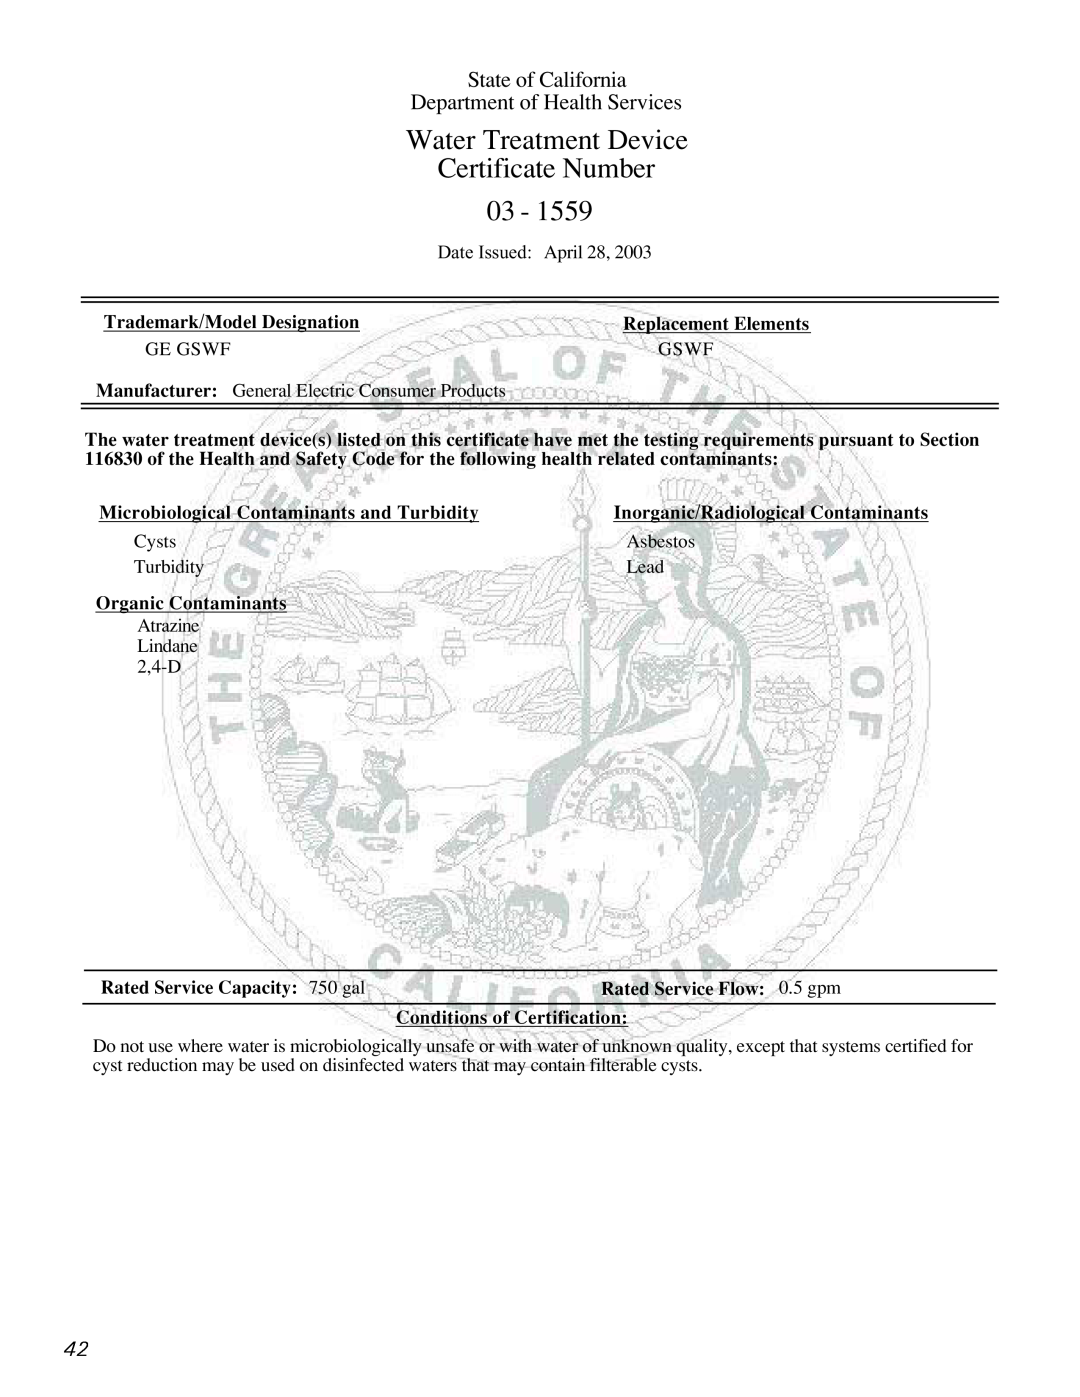 GE Monogram 22, 20 State of California, Department of Health Services, Water Treatment Device, Certificate Number 